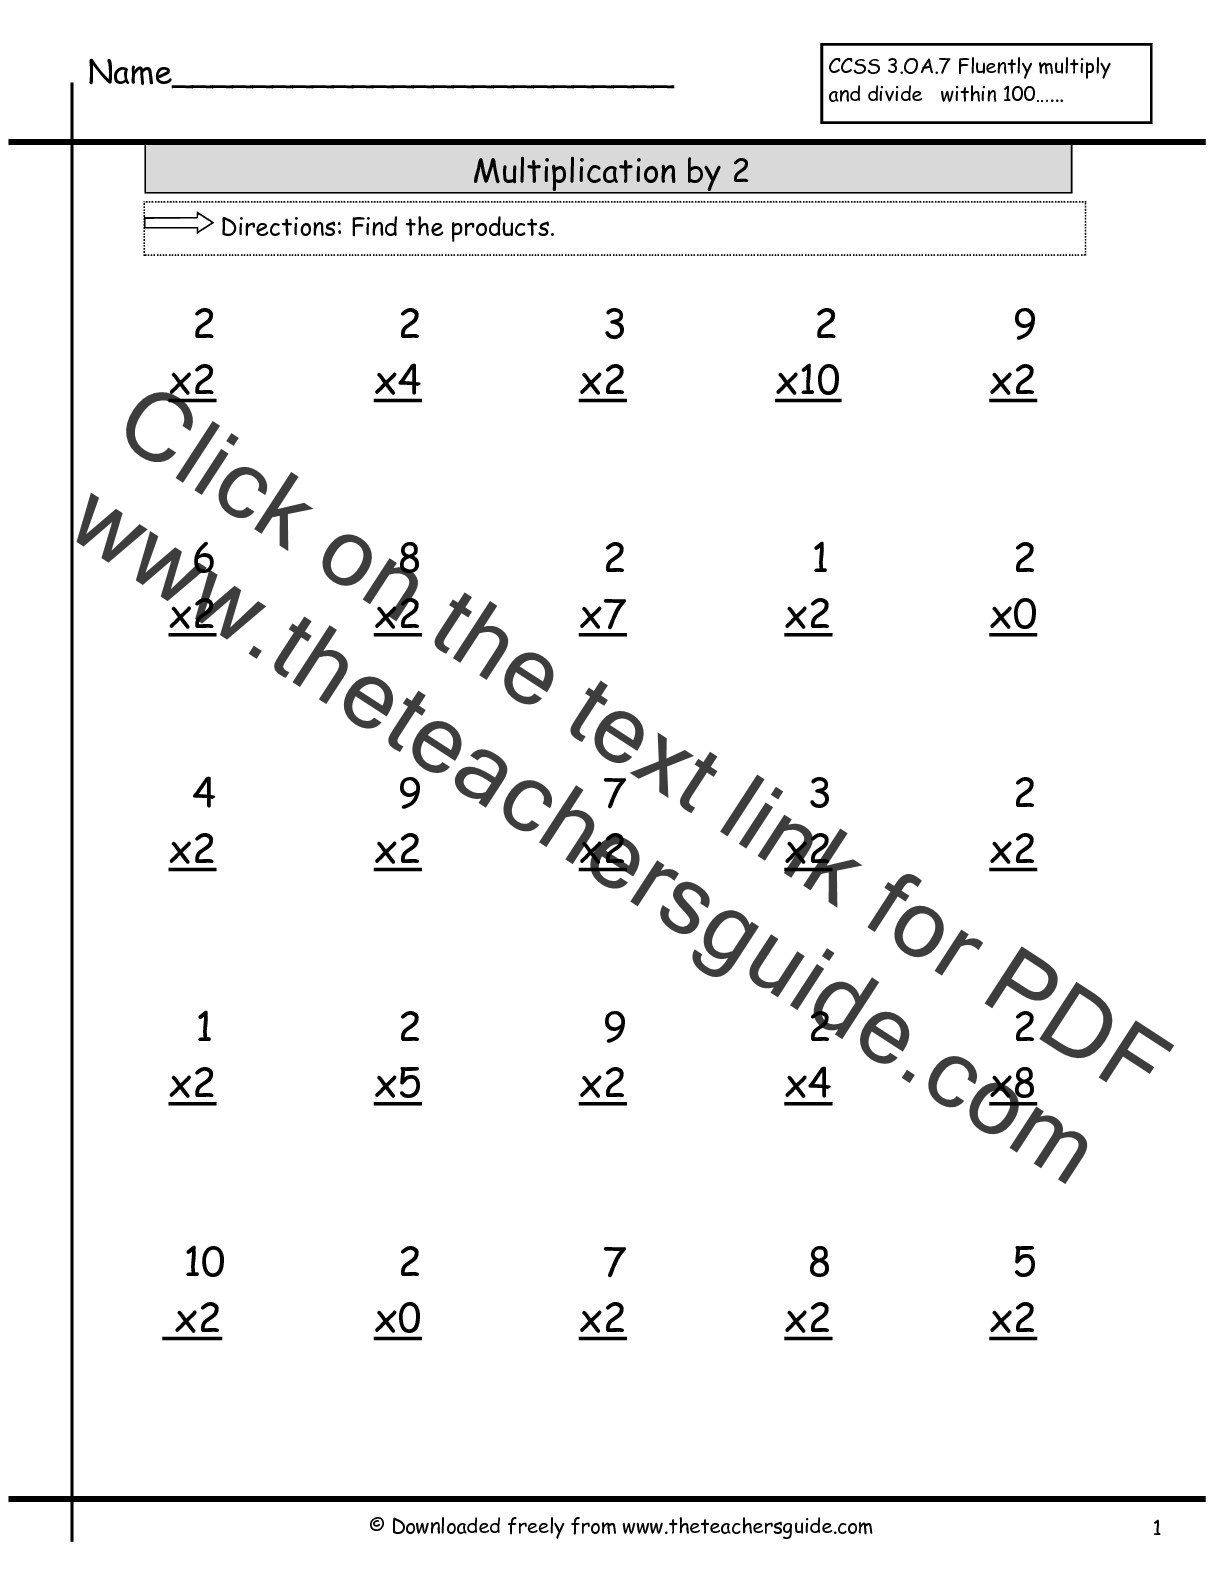 Multiplication Facts To 10 Worksheet